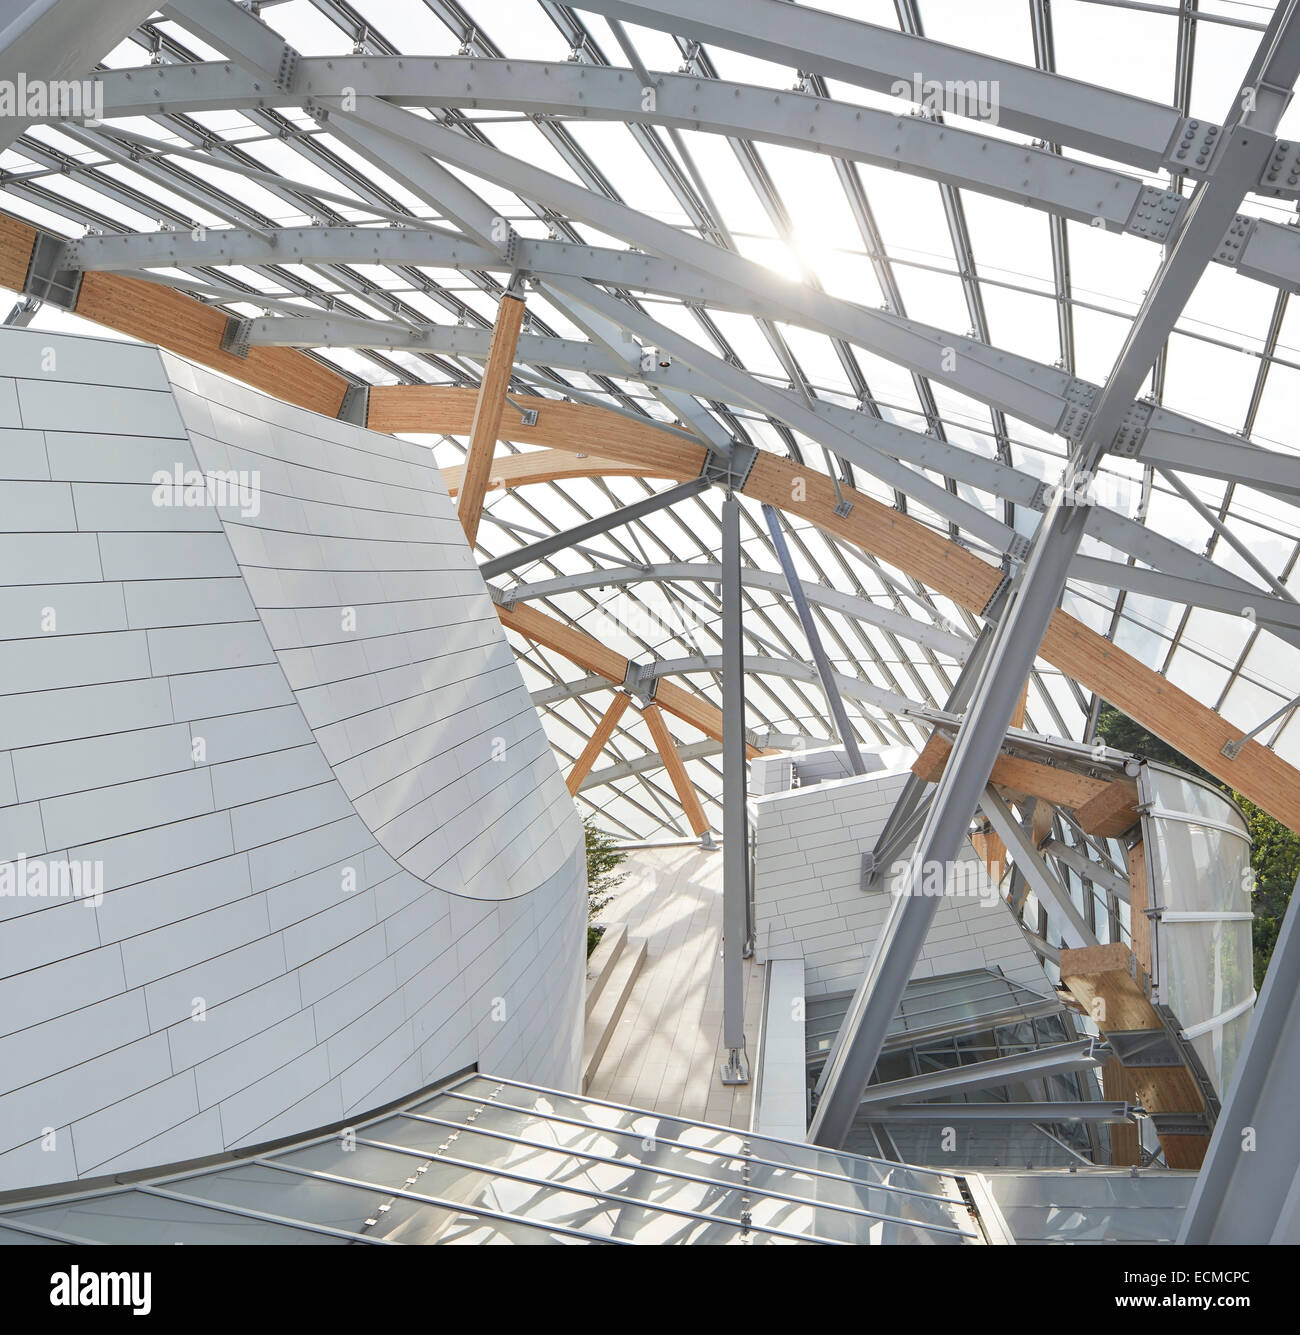 Fondation Louis Vuitton design by Gehry Partners